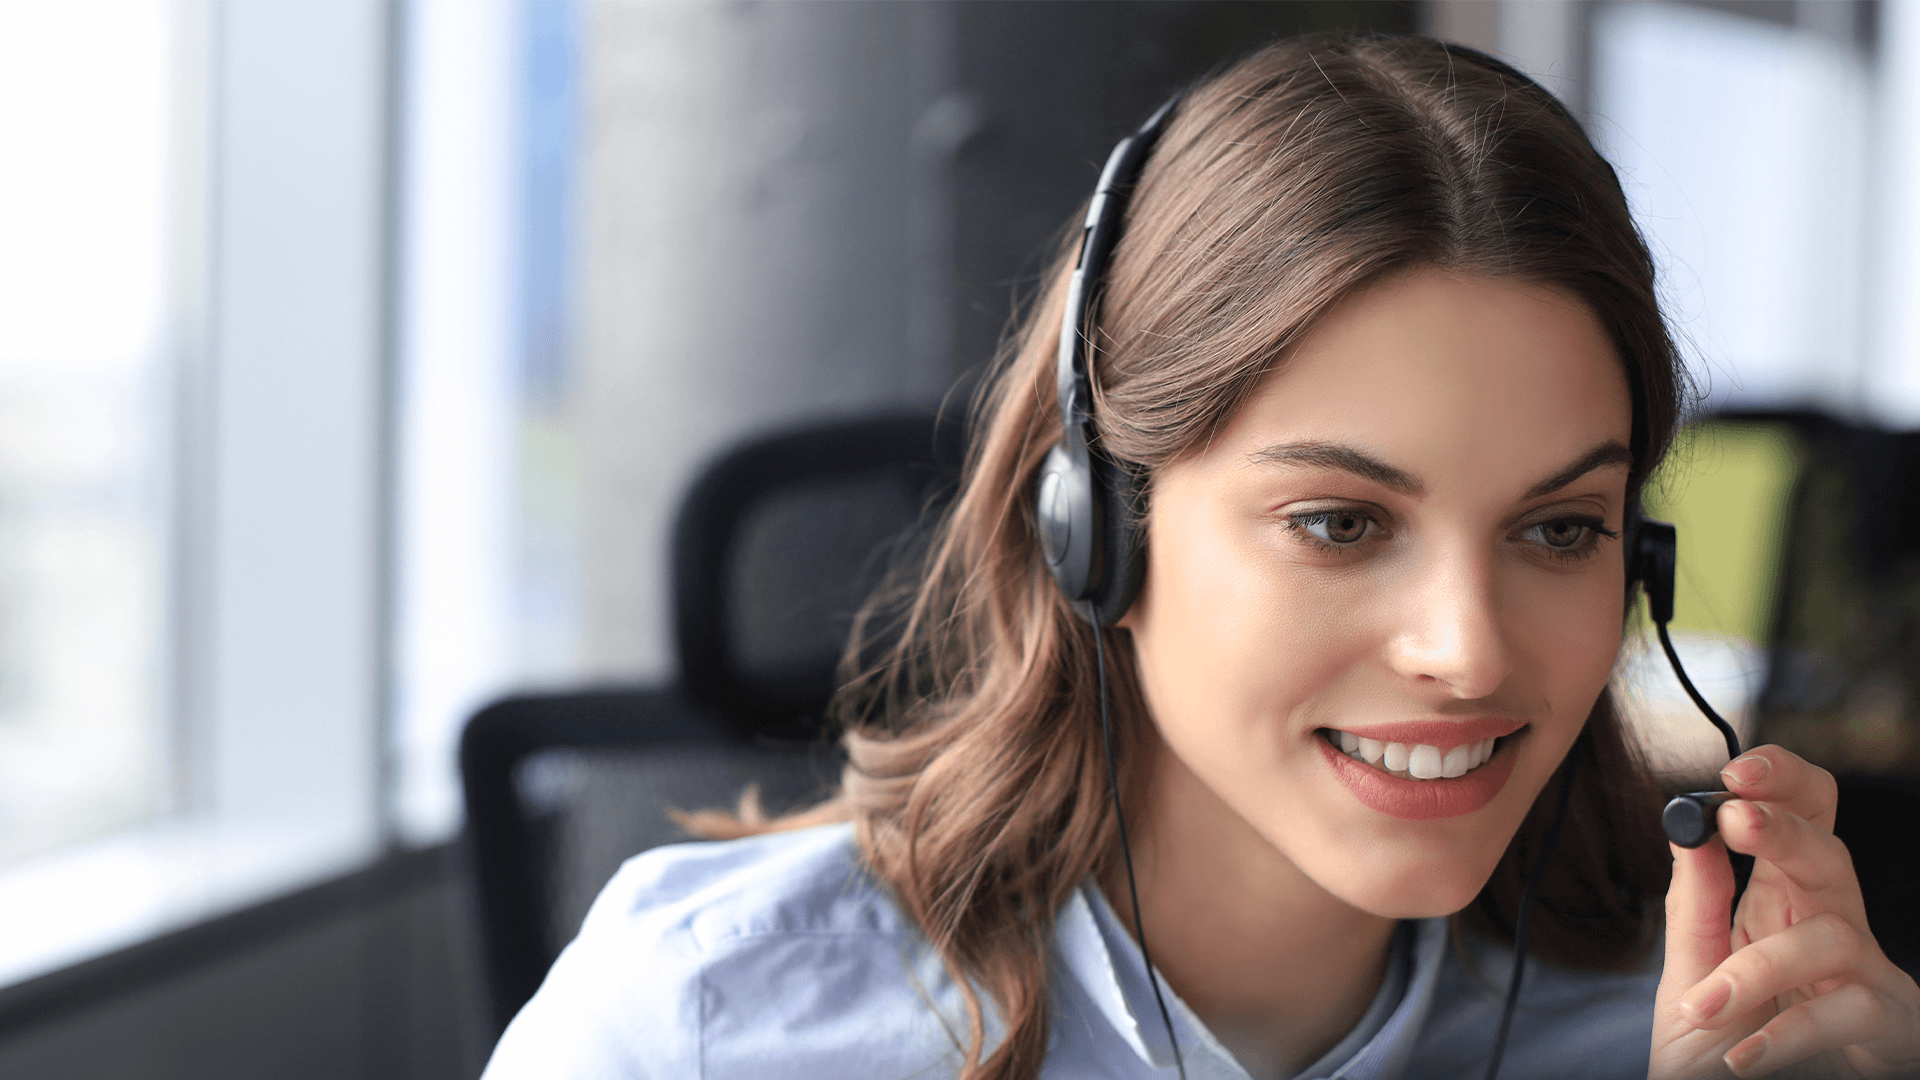 call center worker in headphones is working at modern office